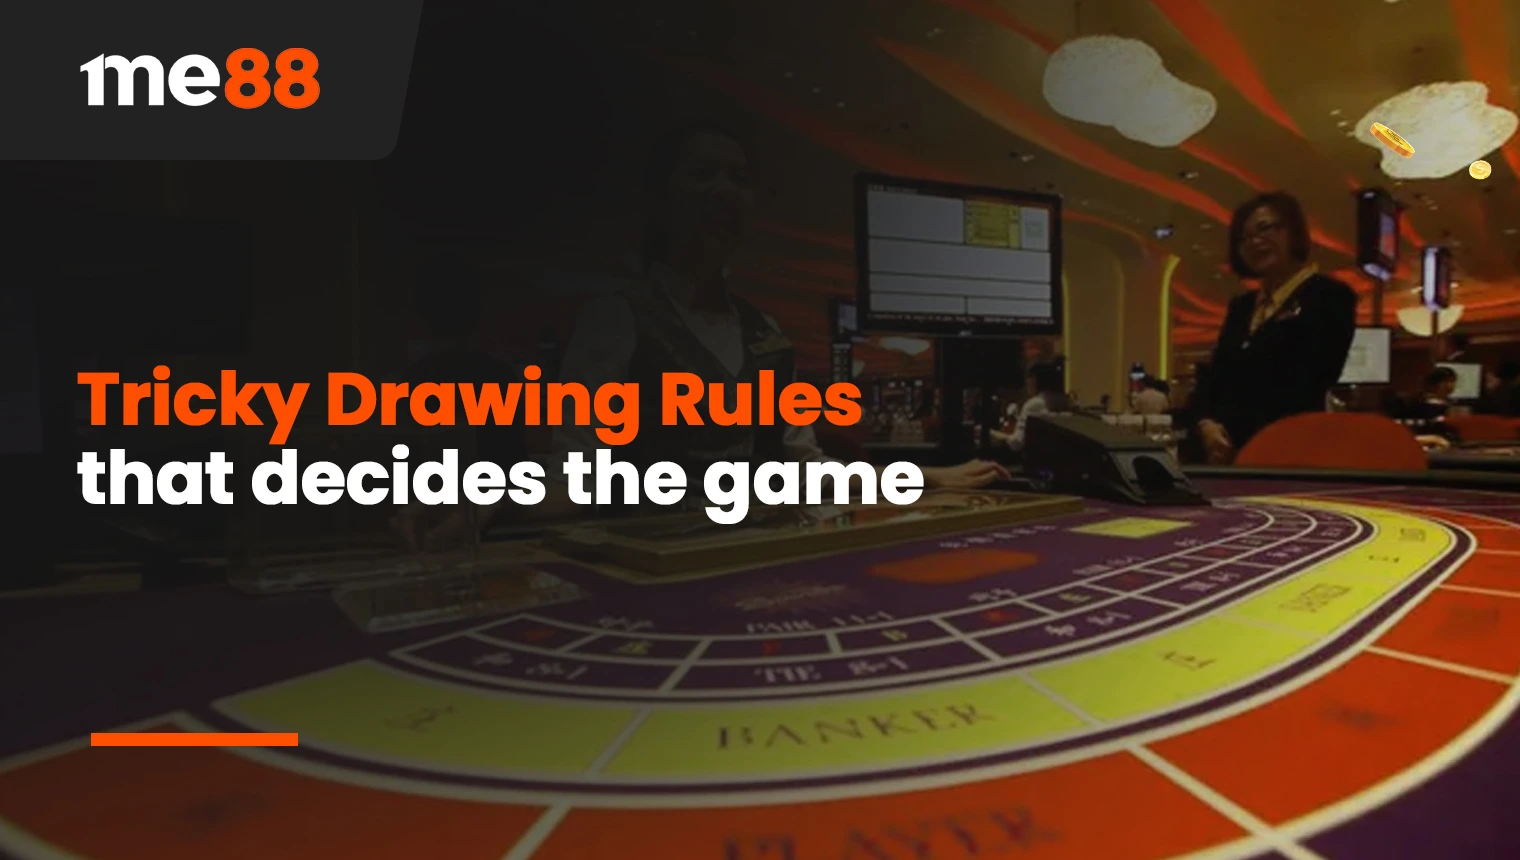 Tricky Drawing Rules that decides the game